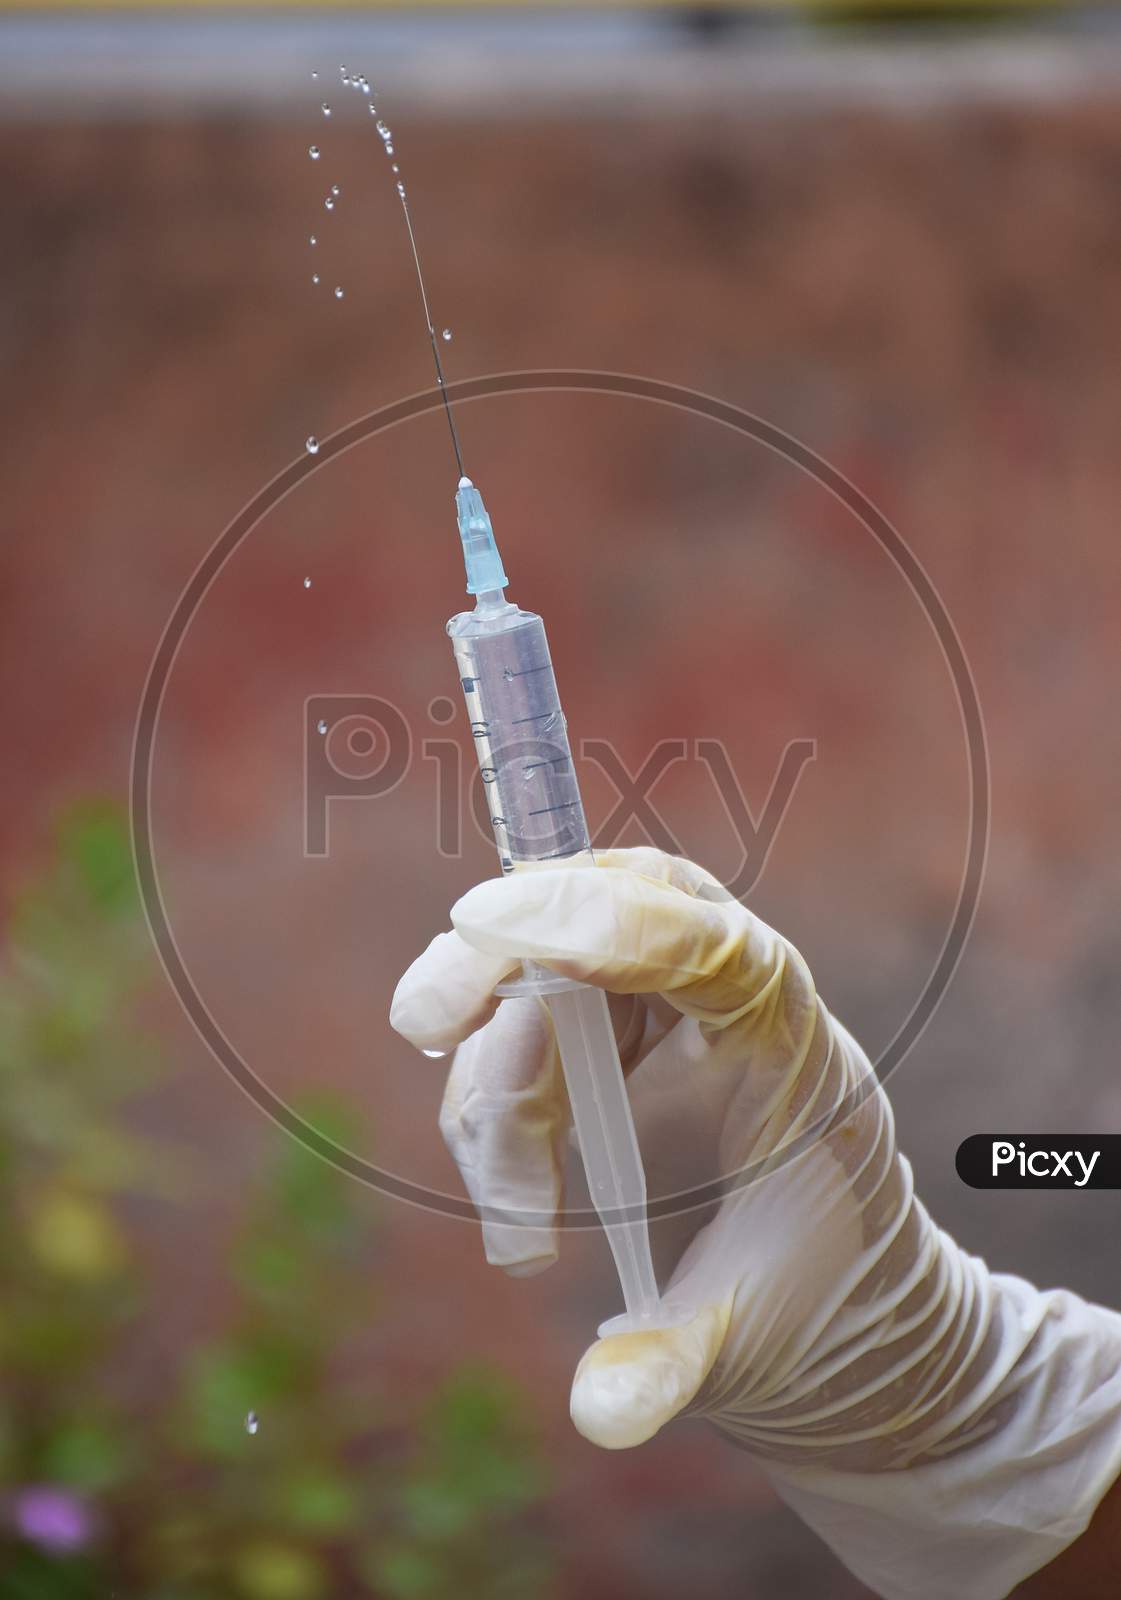 Removing Air bubbles from Syringe